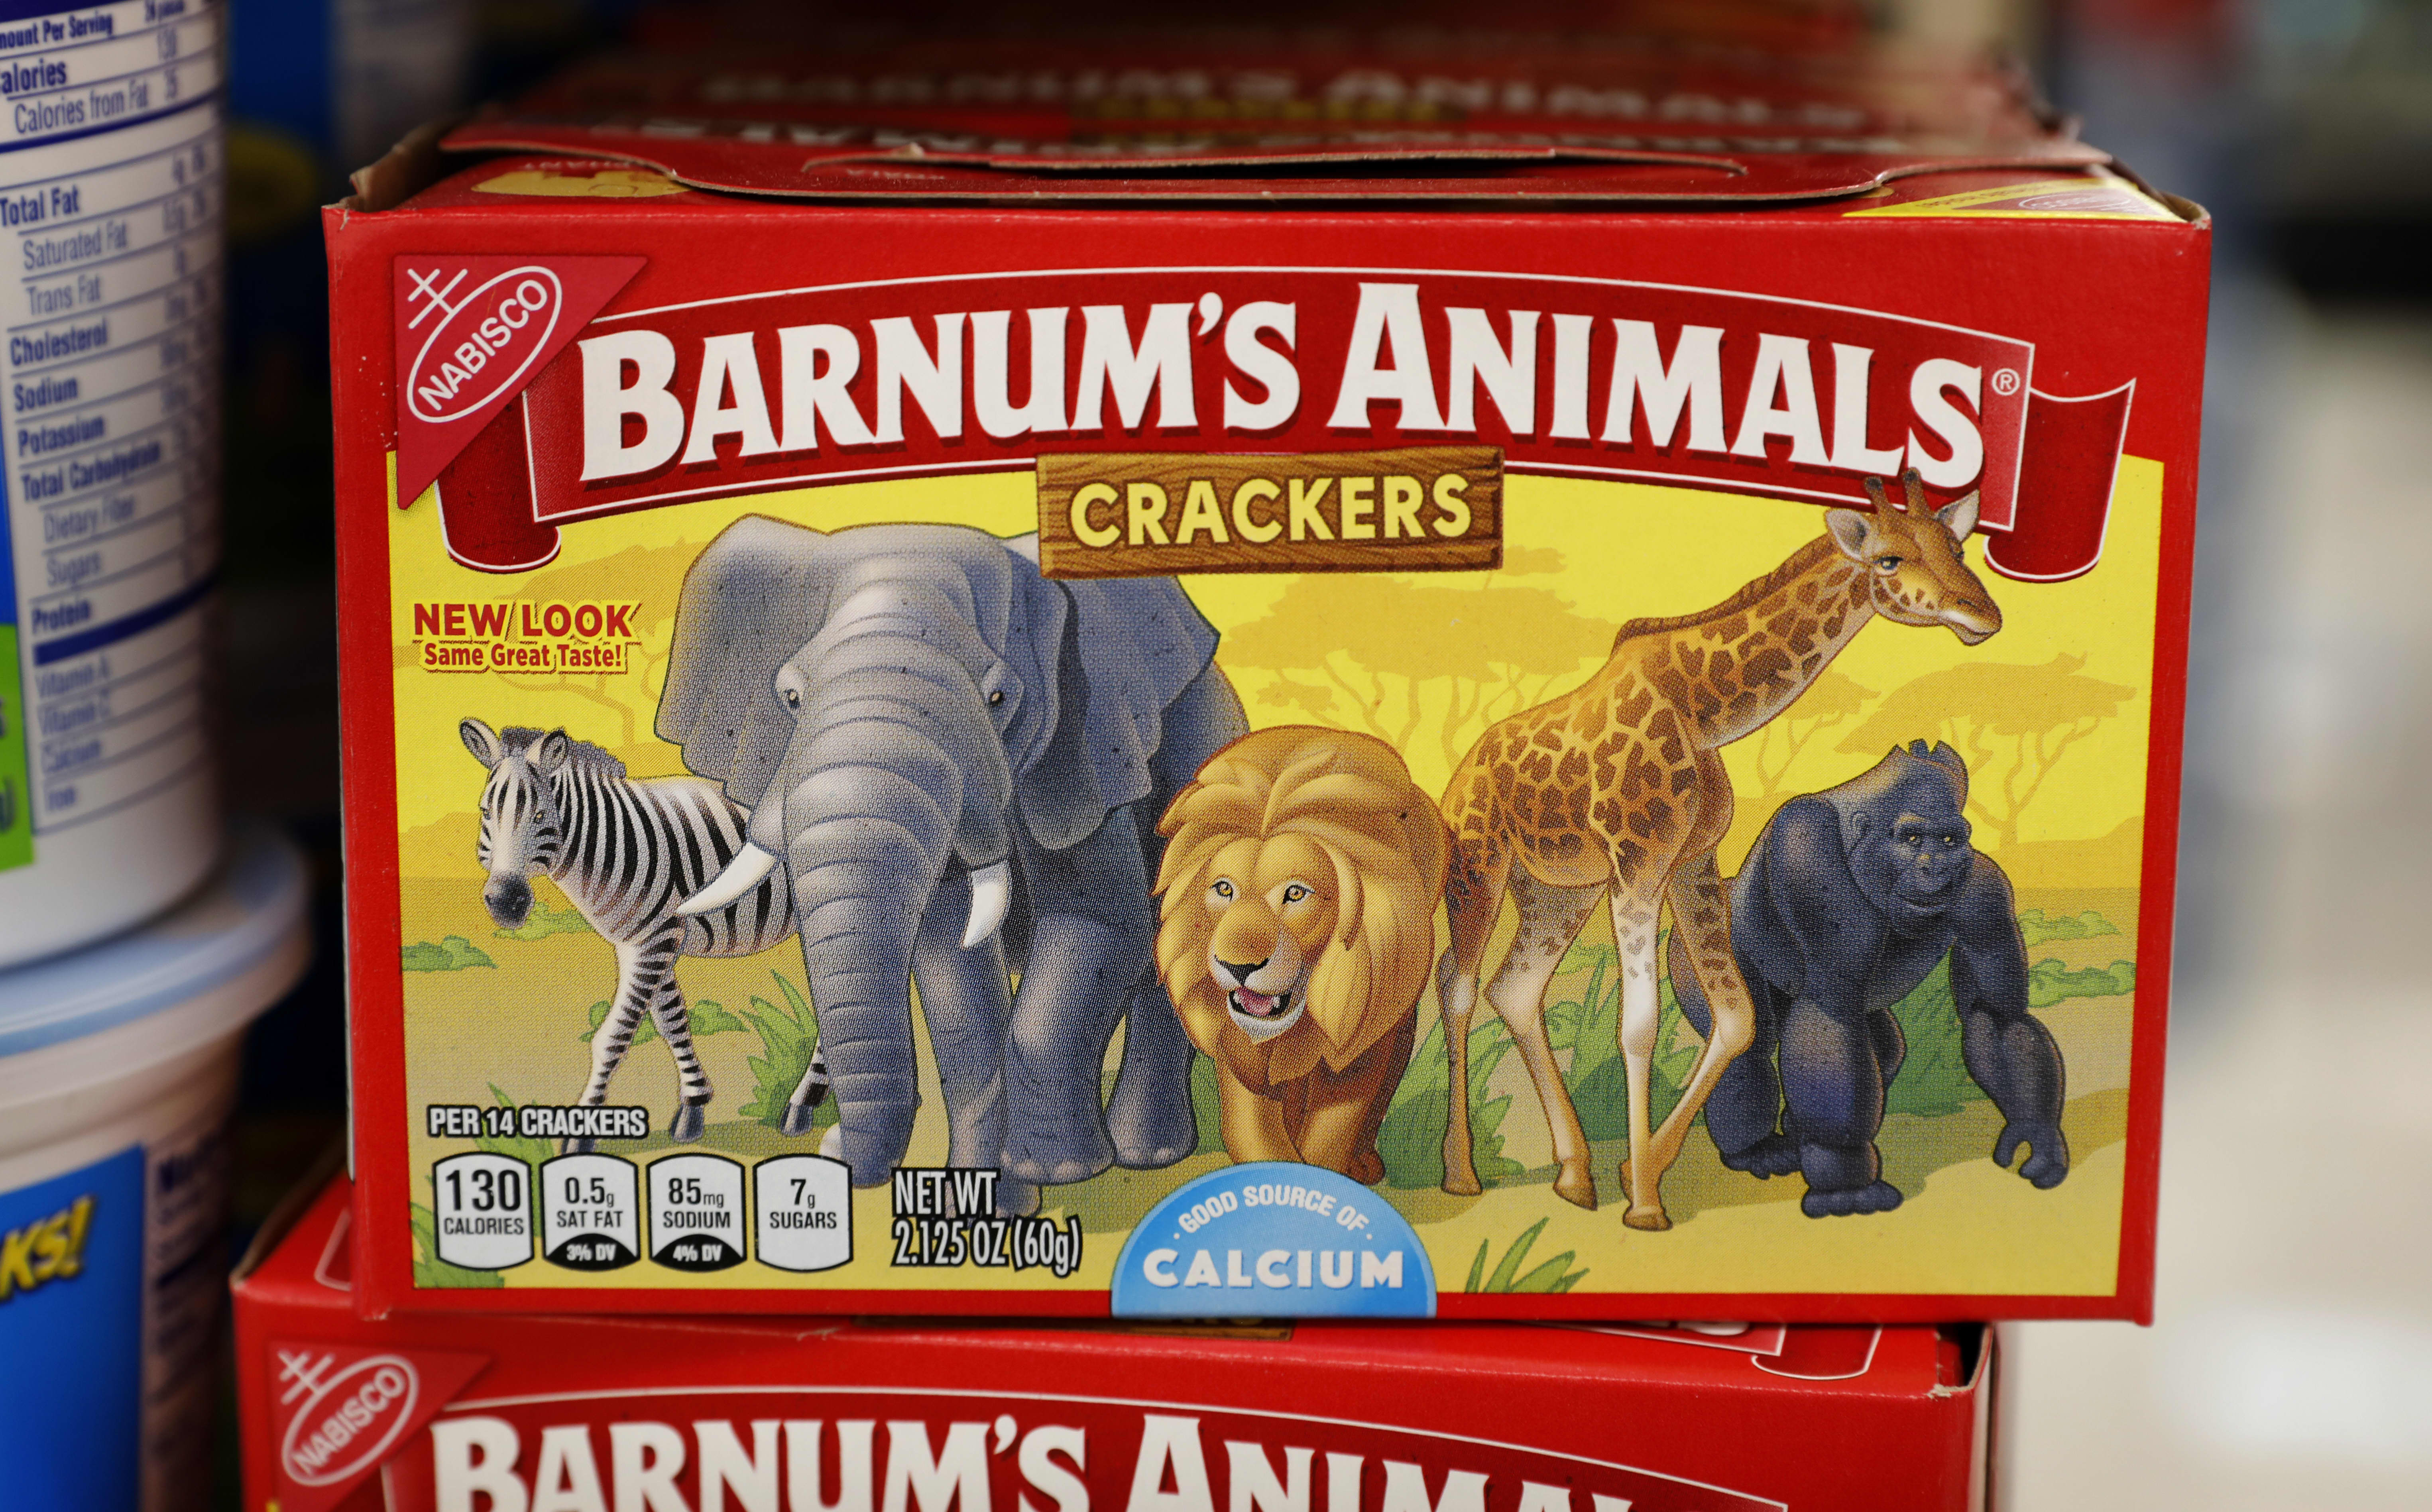 Animal crackers break out of their cages